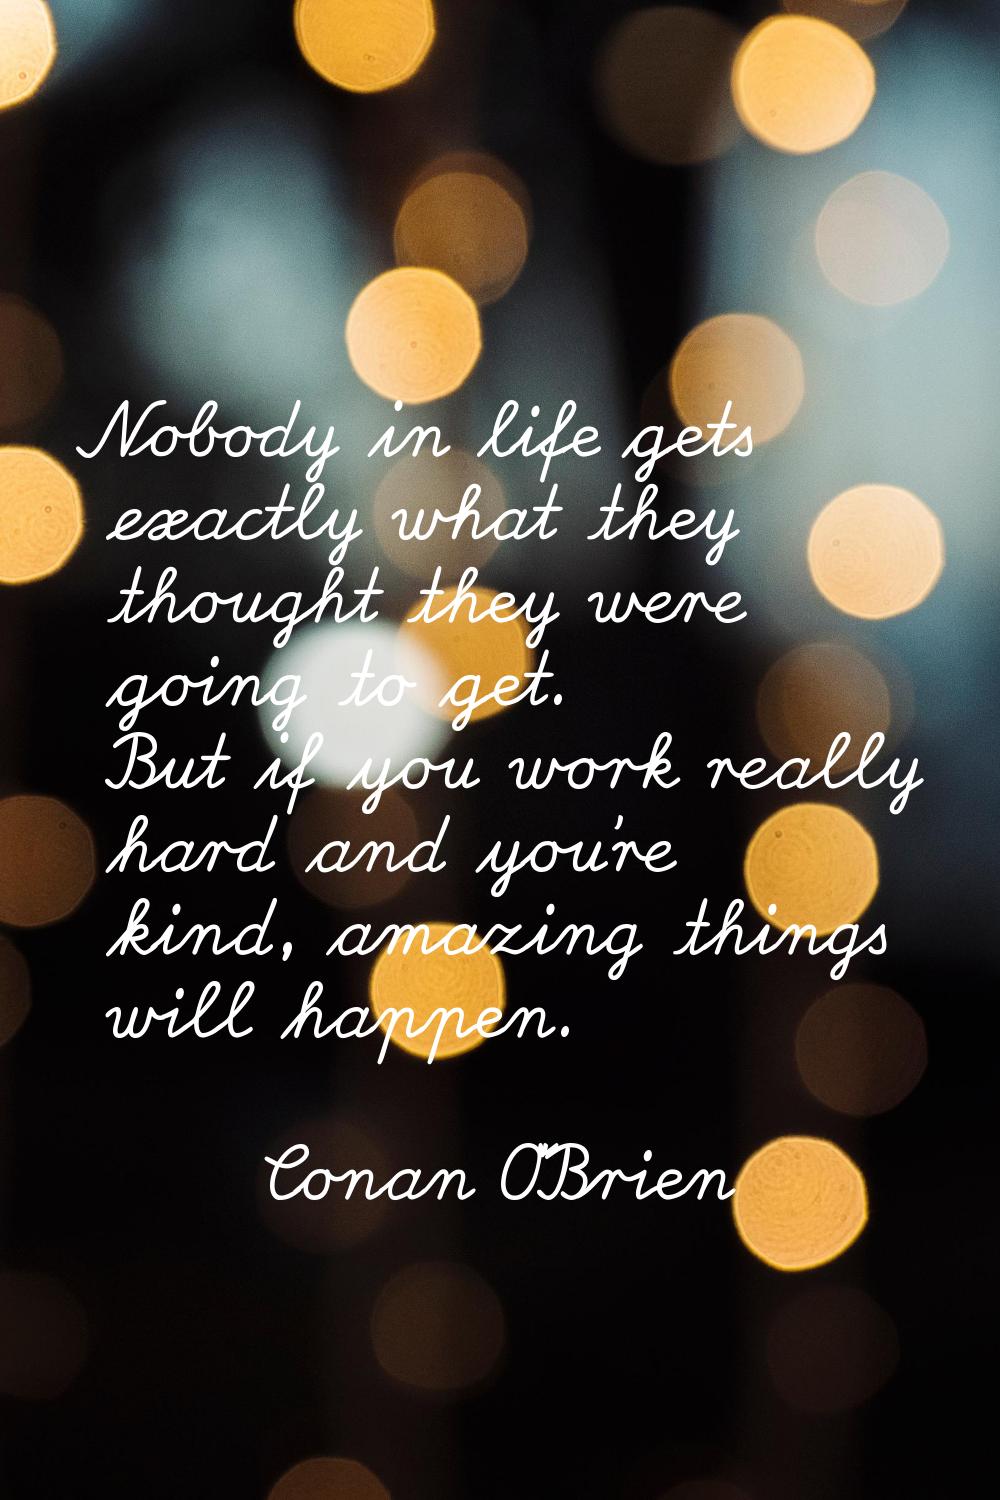 Nobody in life gets exactly what they thought they were going to get. But if you work really hard a